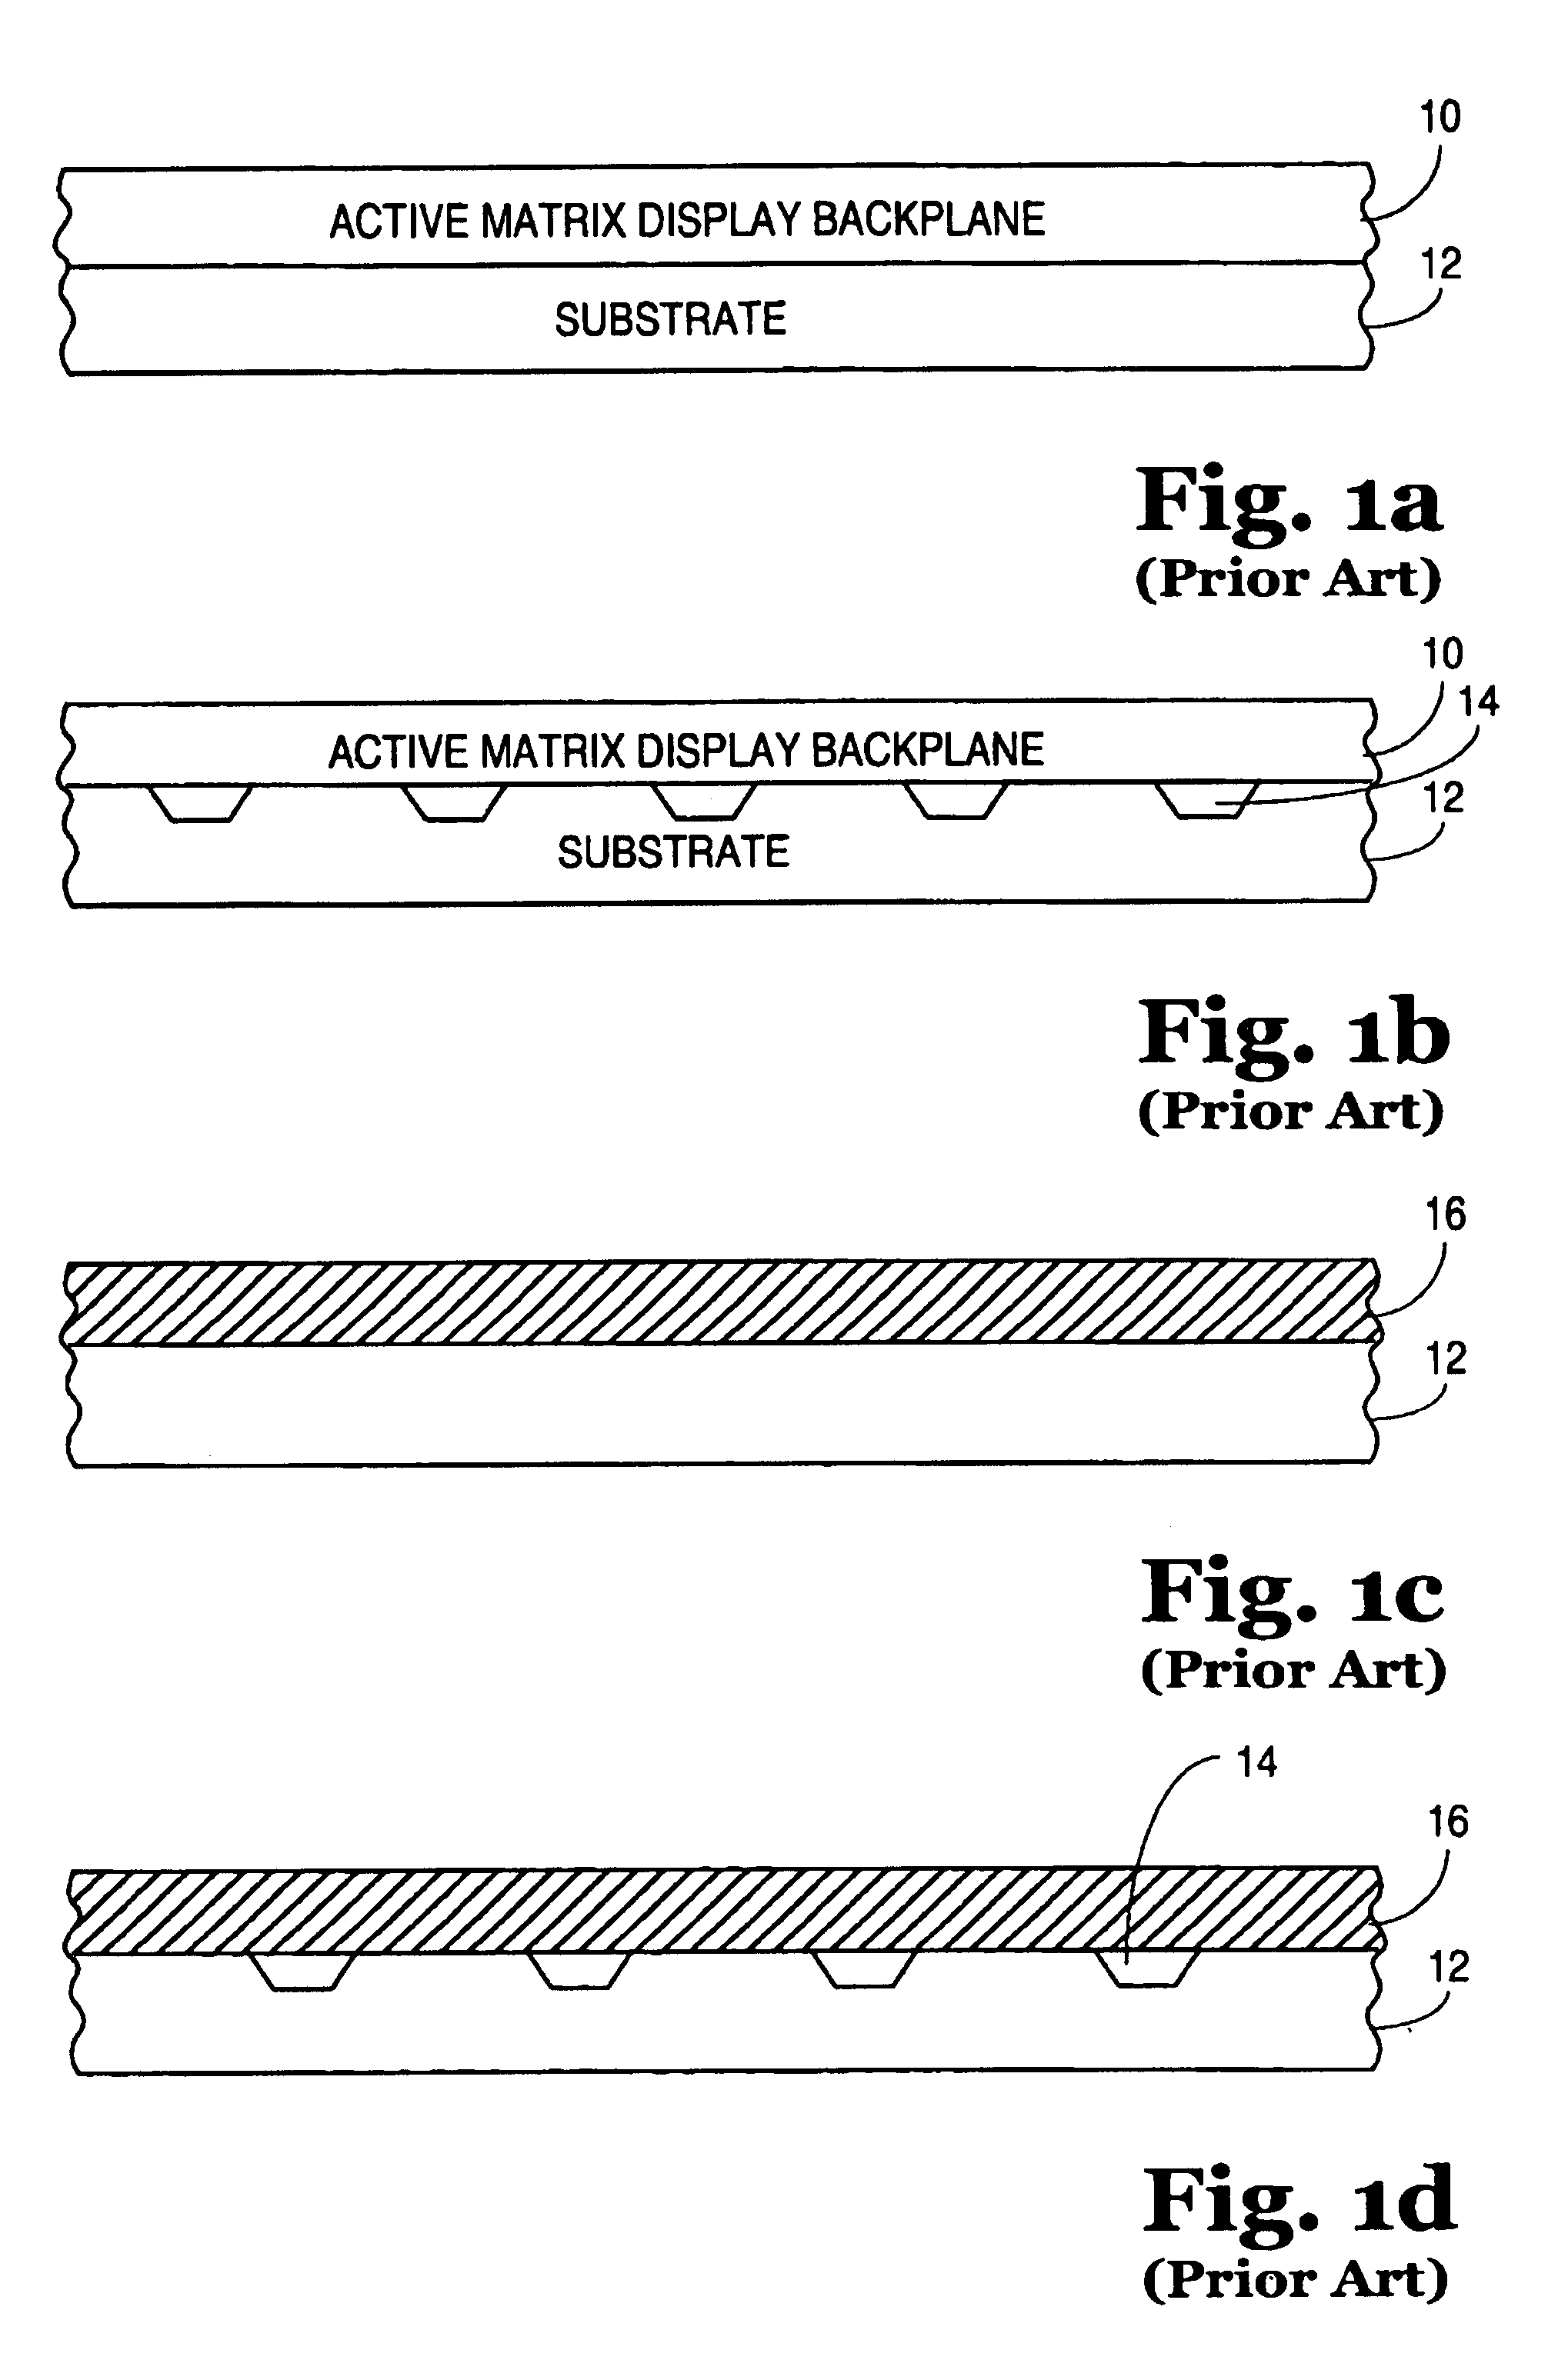 Apparatuses and methods for flexible displays